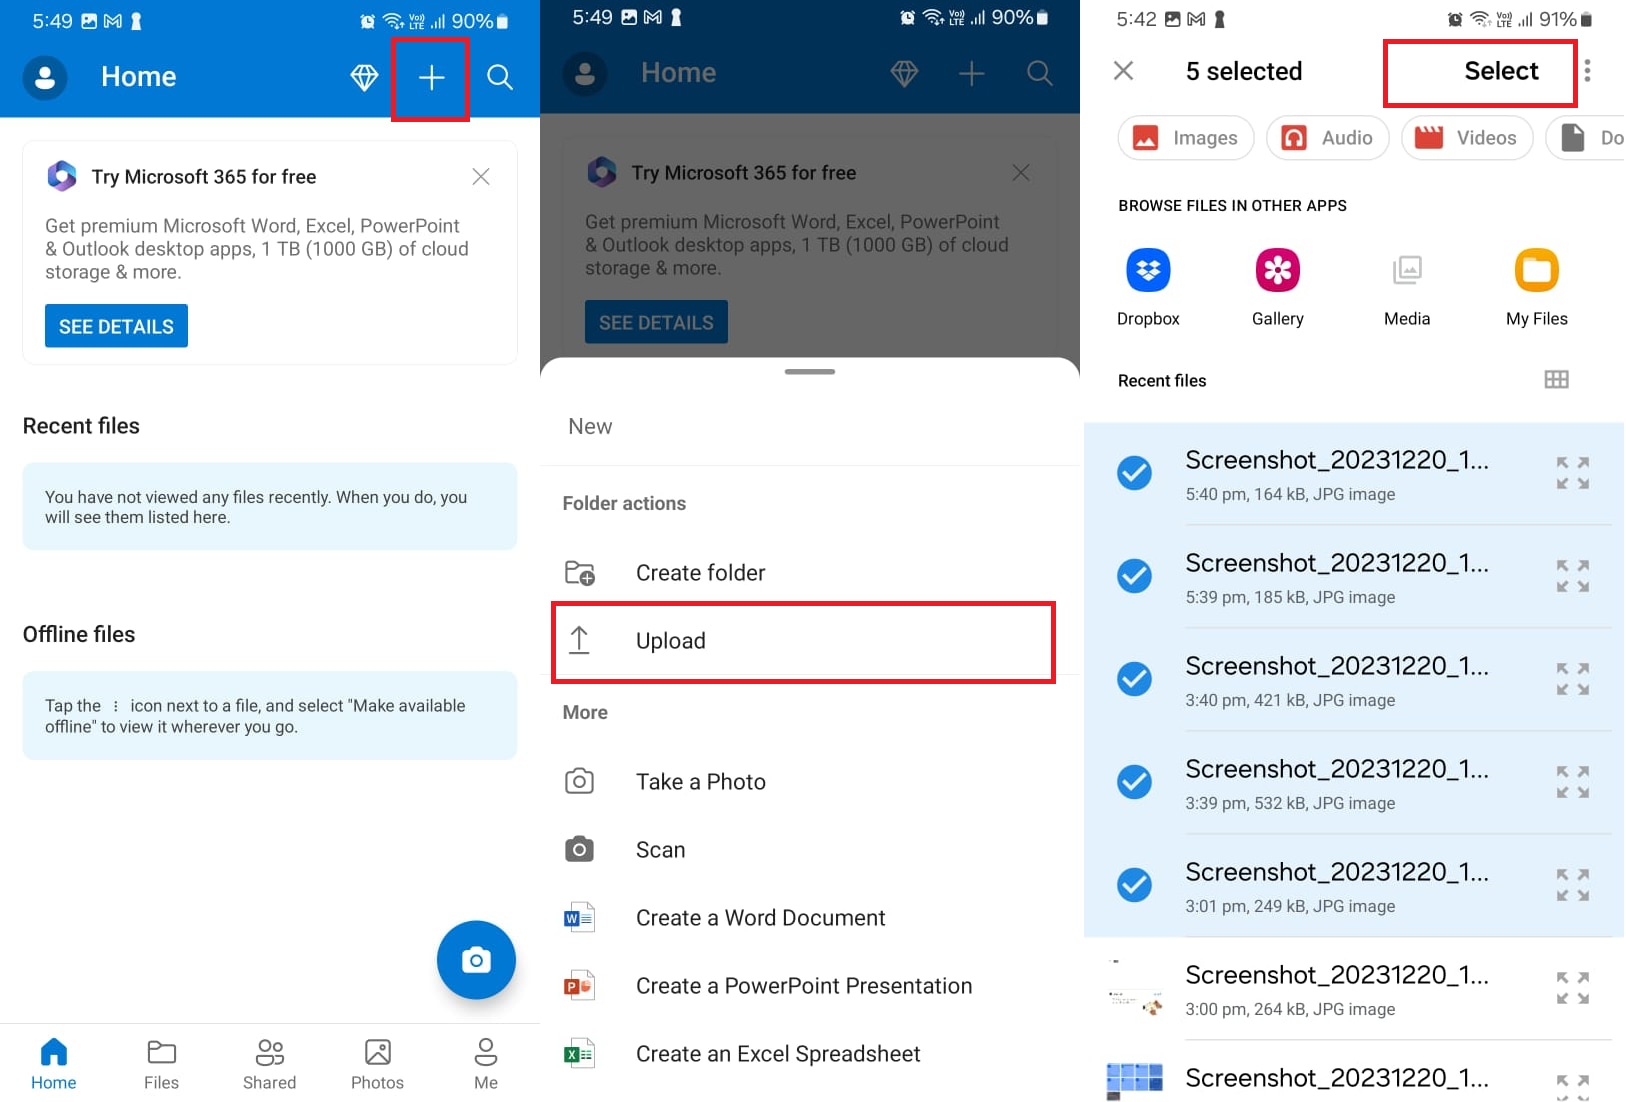 Upload files to OneDrive